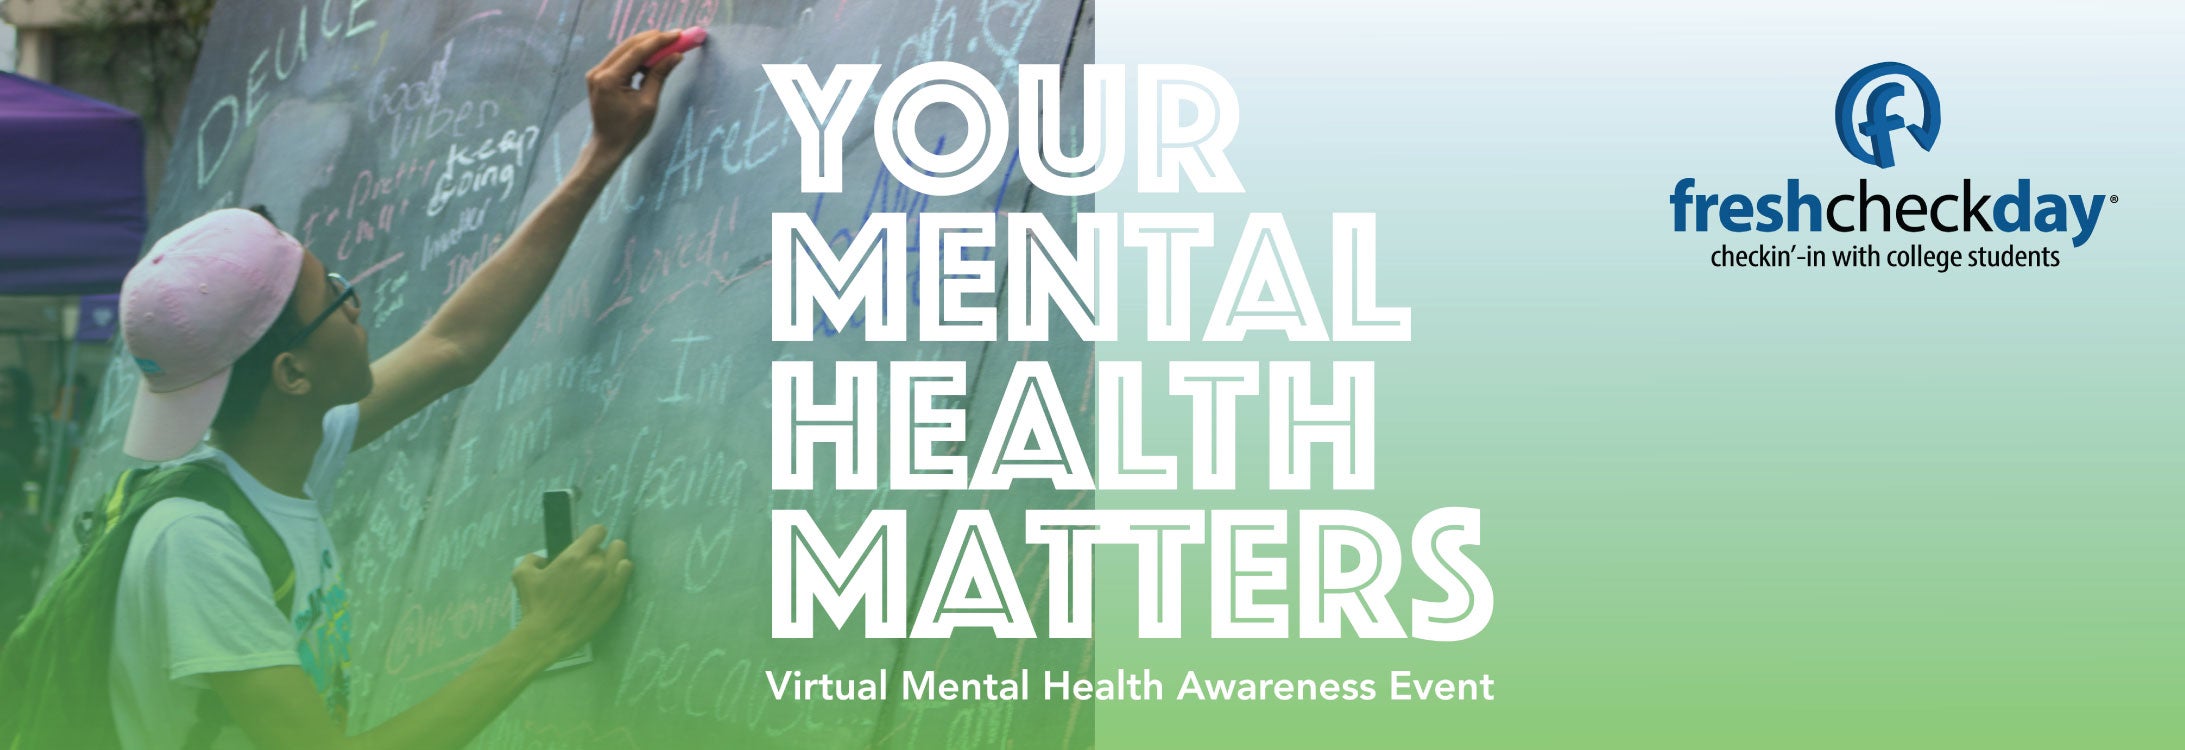 Your Mental Health Matters - Fresh Check Day